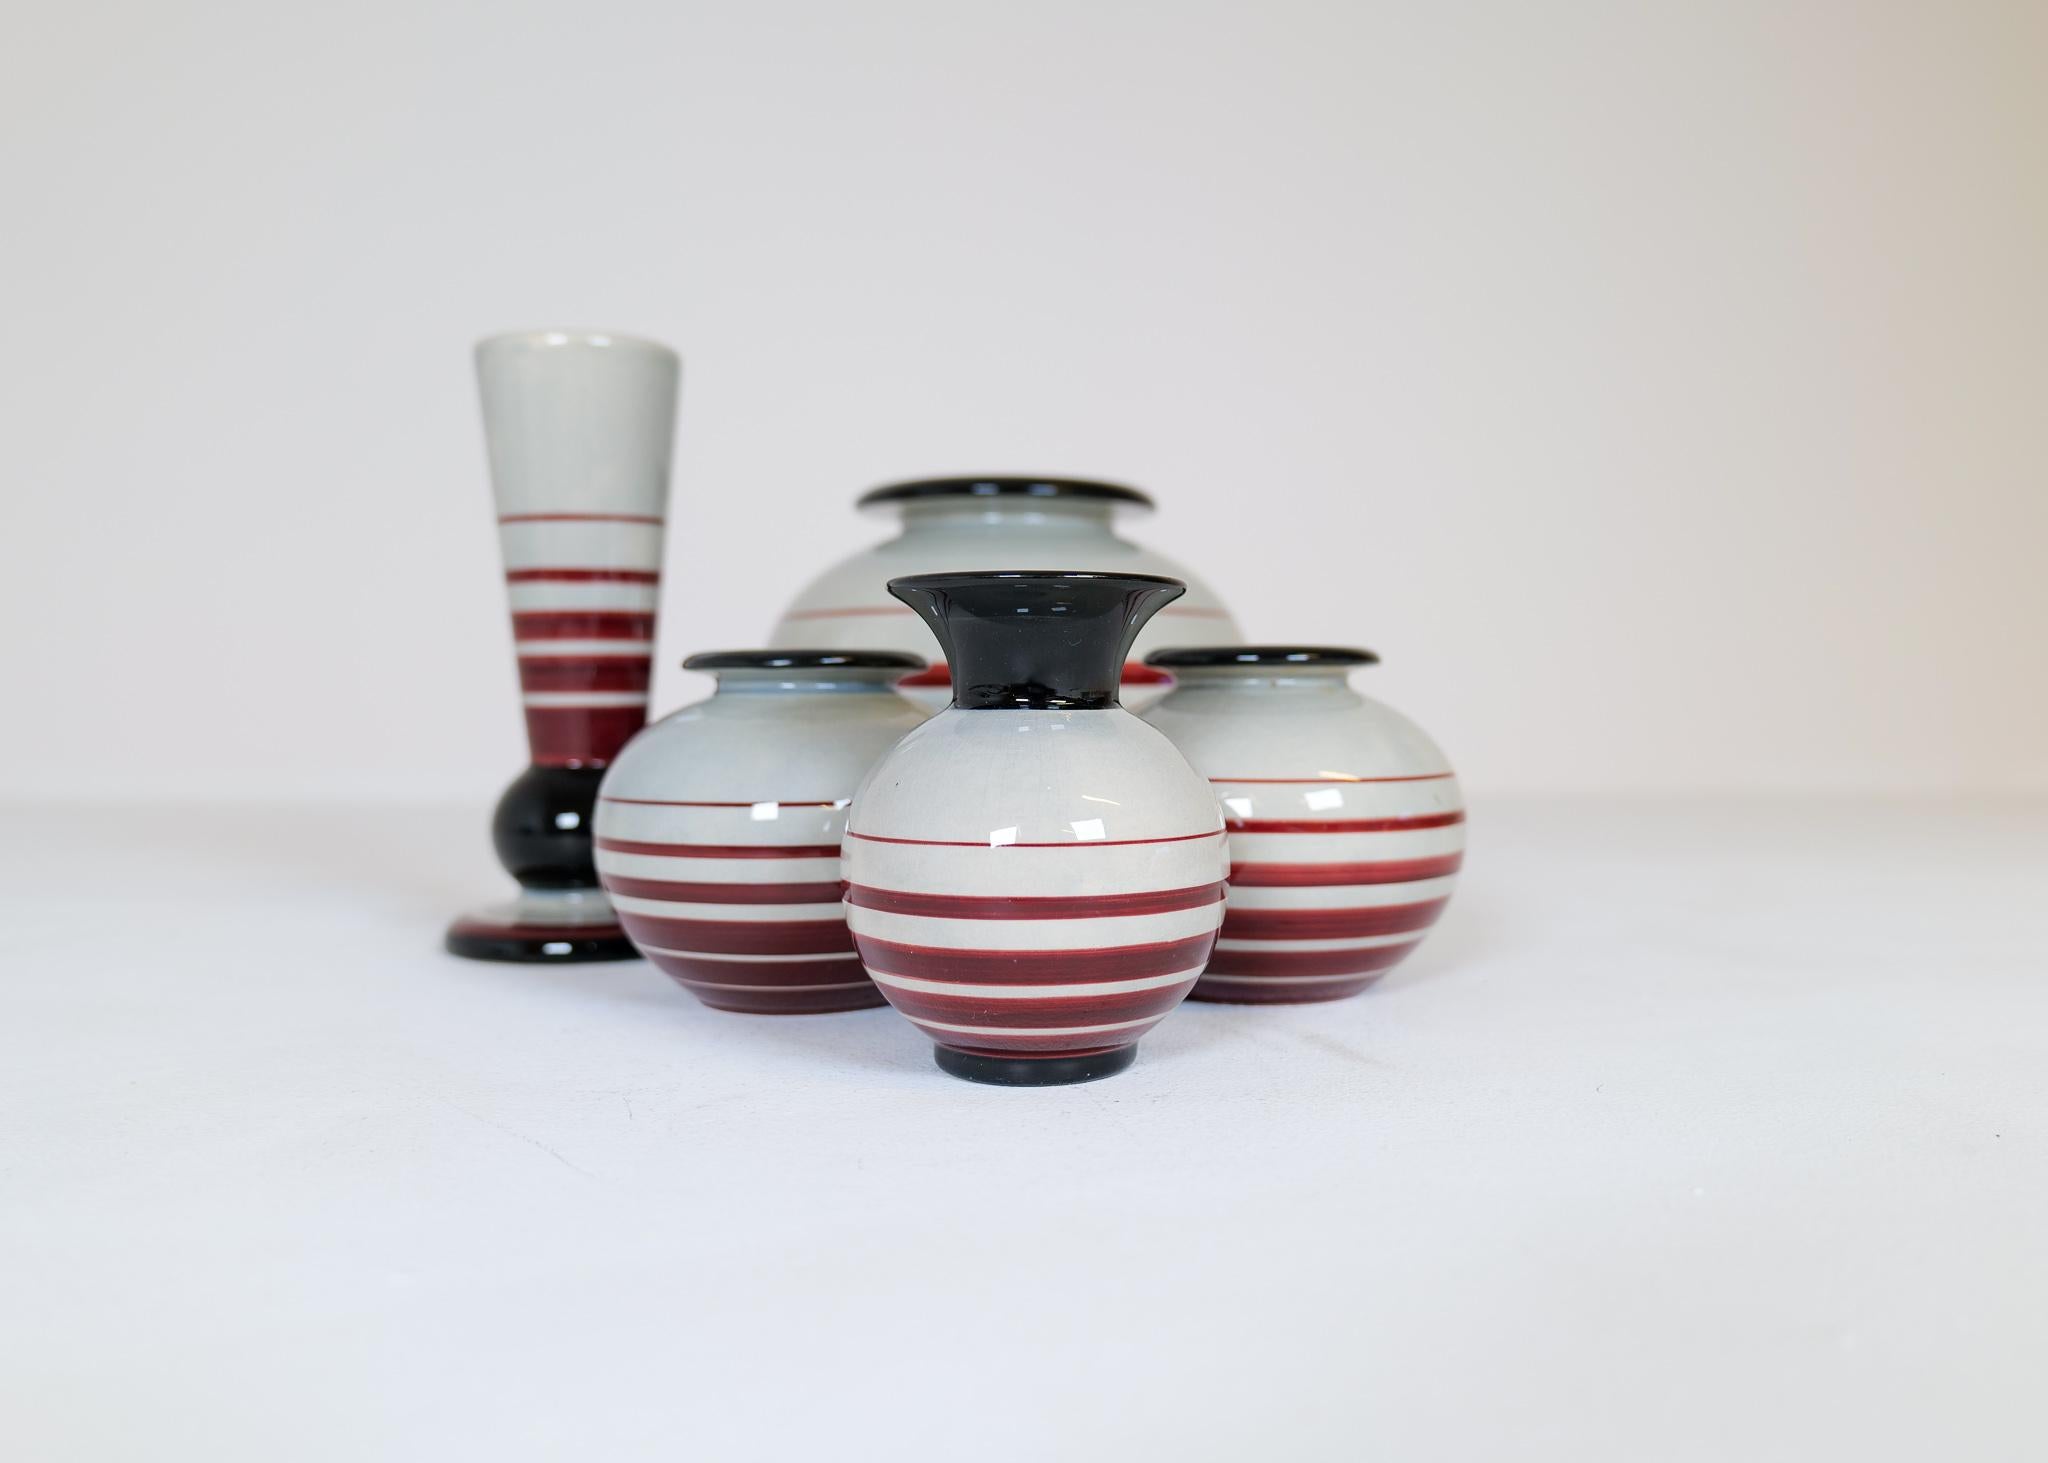 This set containing 5 Ceramic vases were produced during the 1940s in Sweden. The Art Deco pieces was designed by Ilse Claesson and made at Rörstrand. They are all handmade and hand painted. Typical to this era they are all formed with a rounded